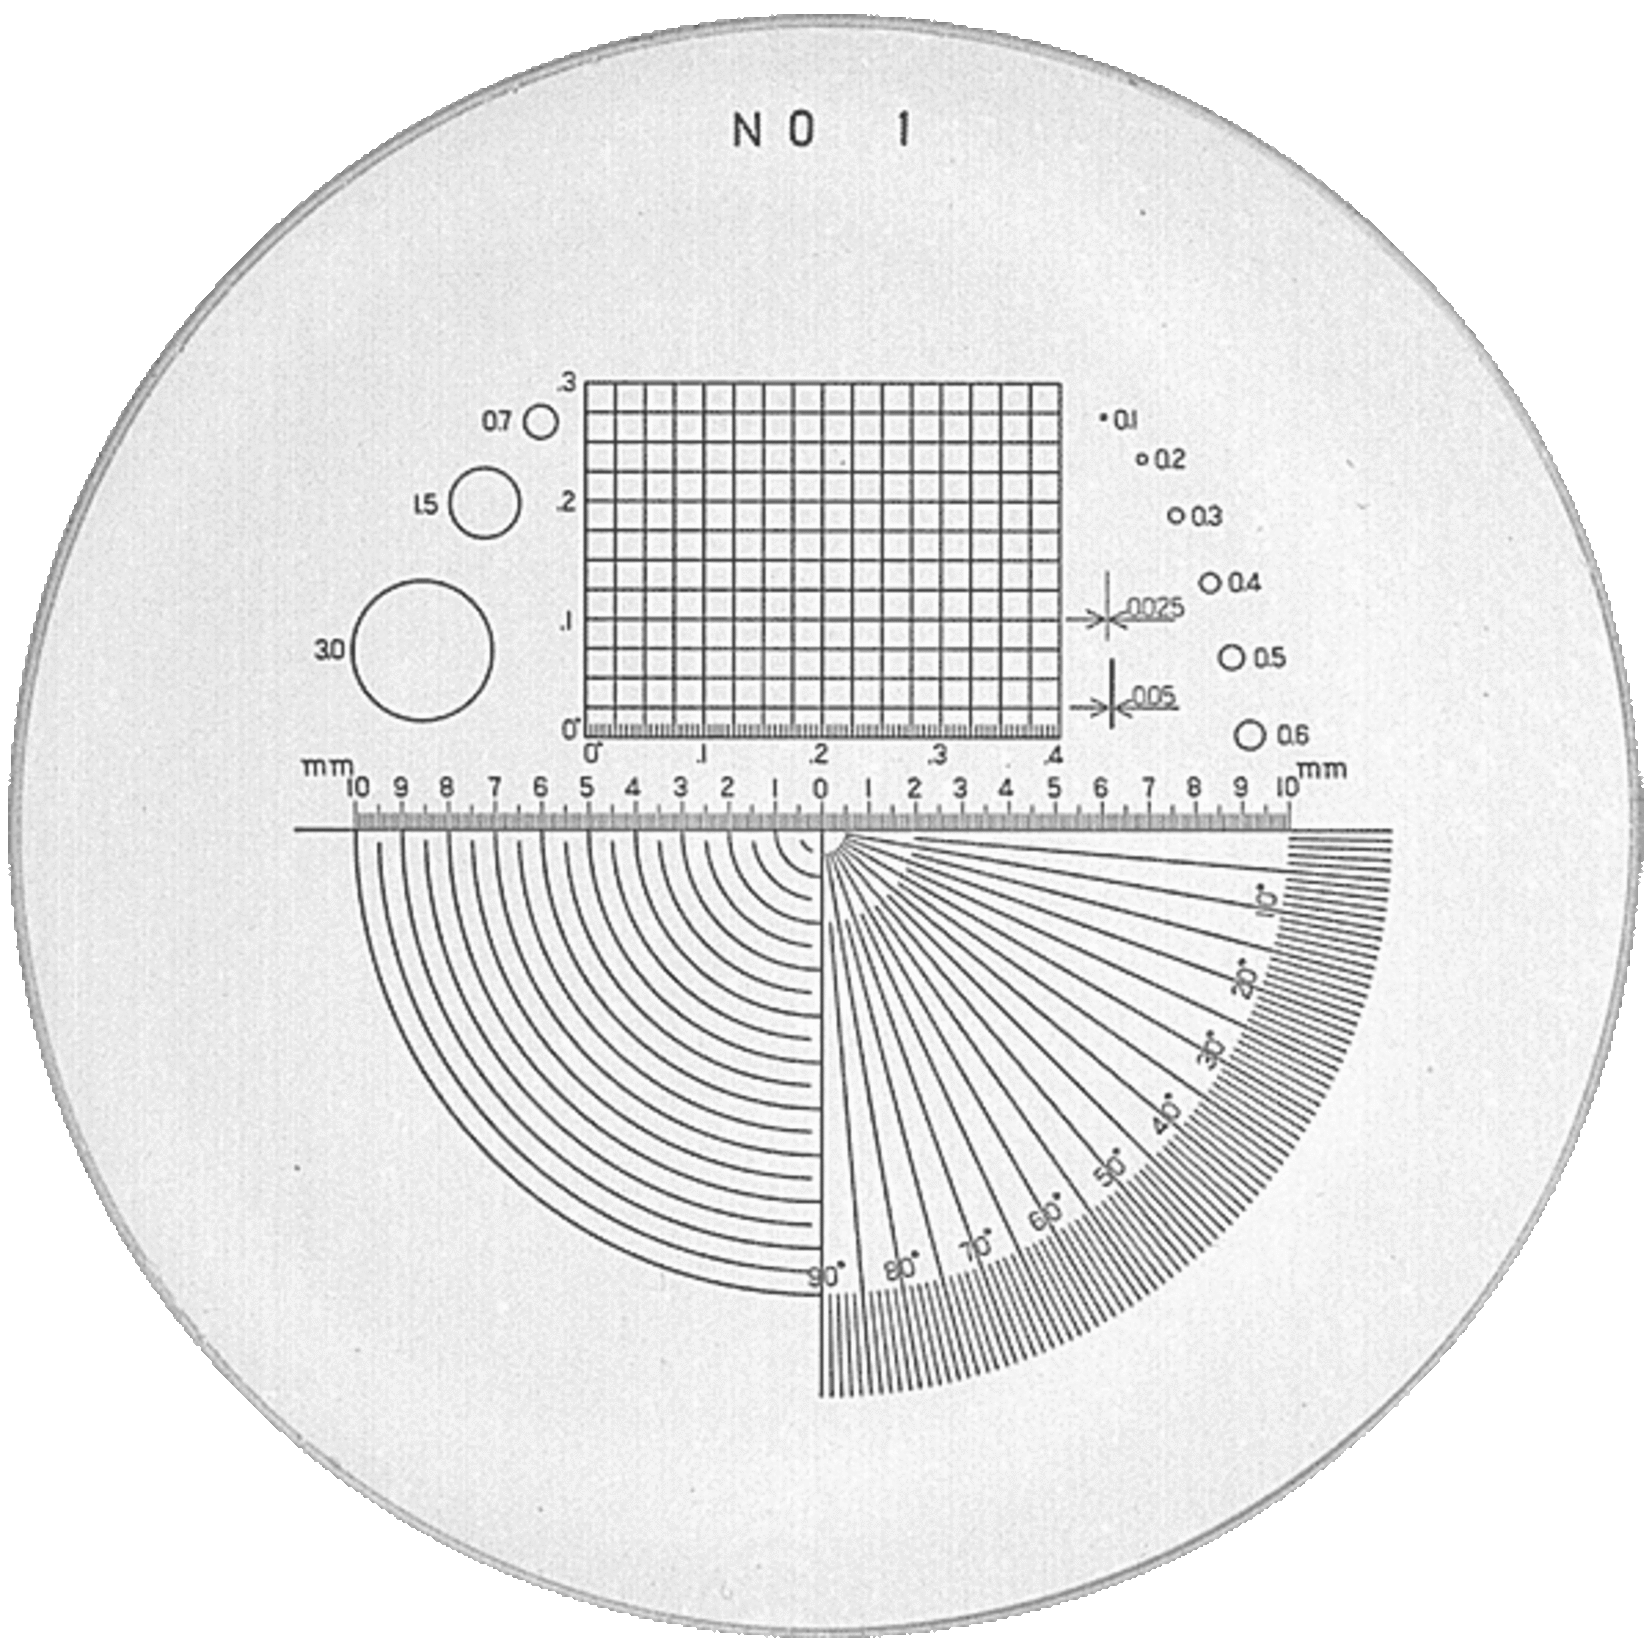 Scales for measuring magnifiers 2015, 1975, 1998 and 1976 in black